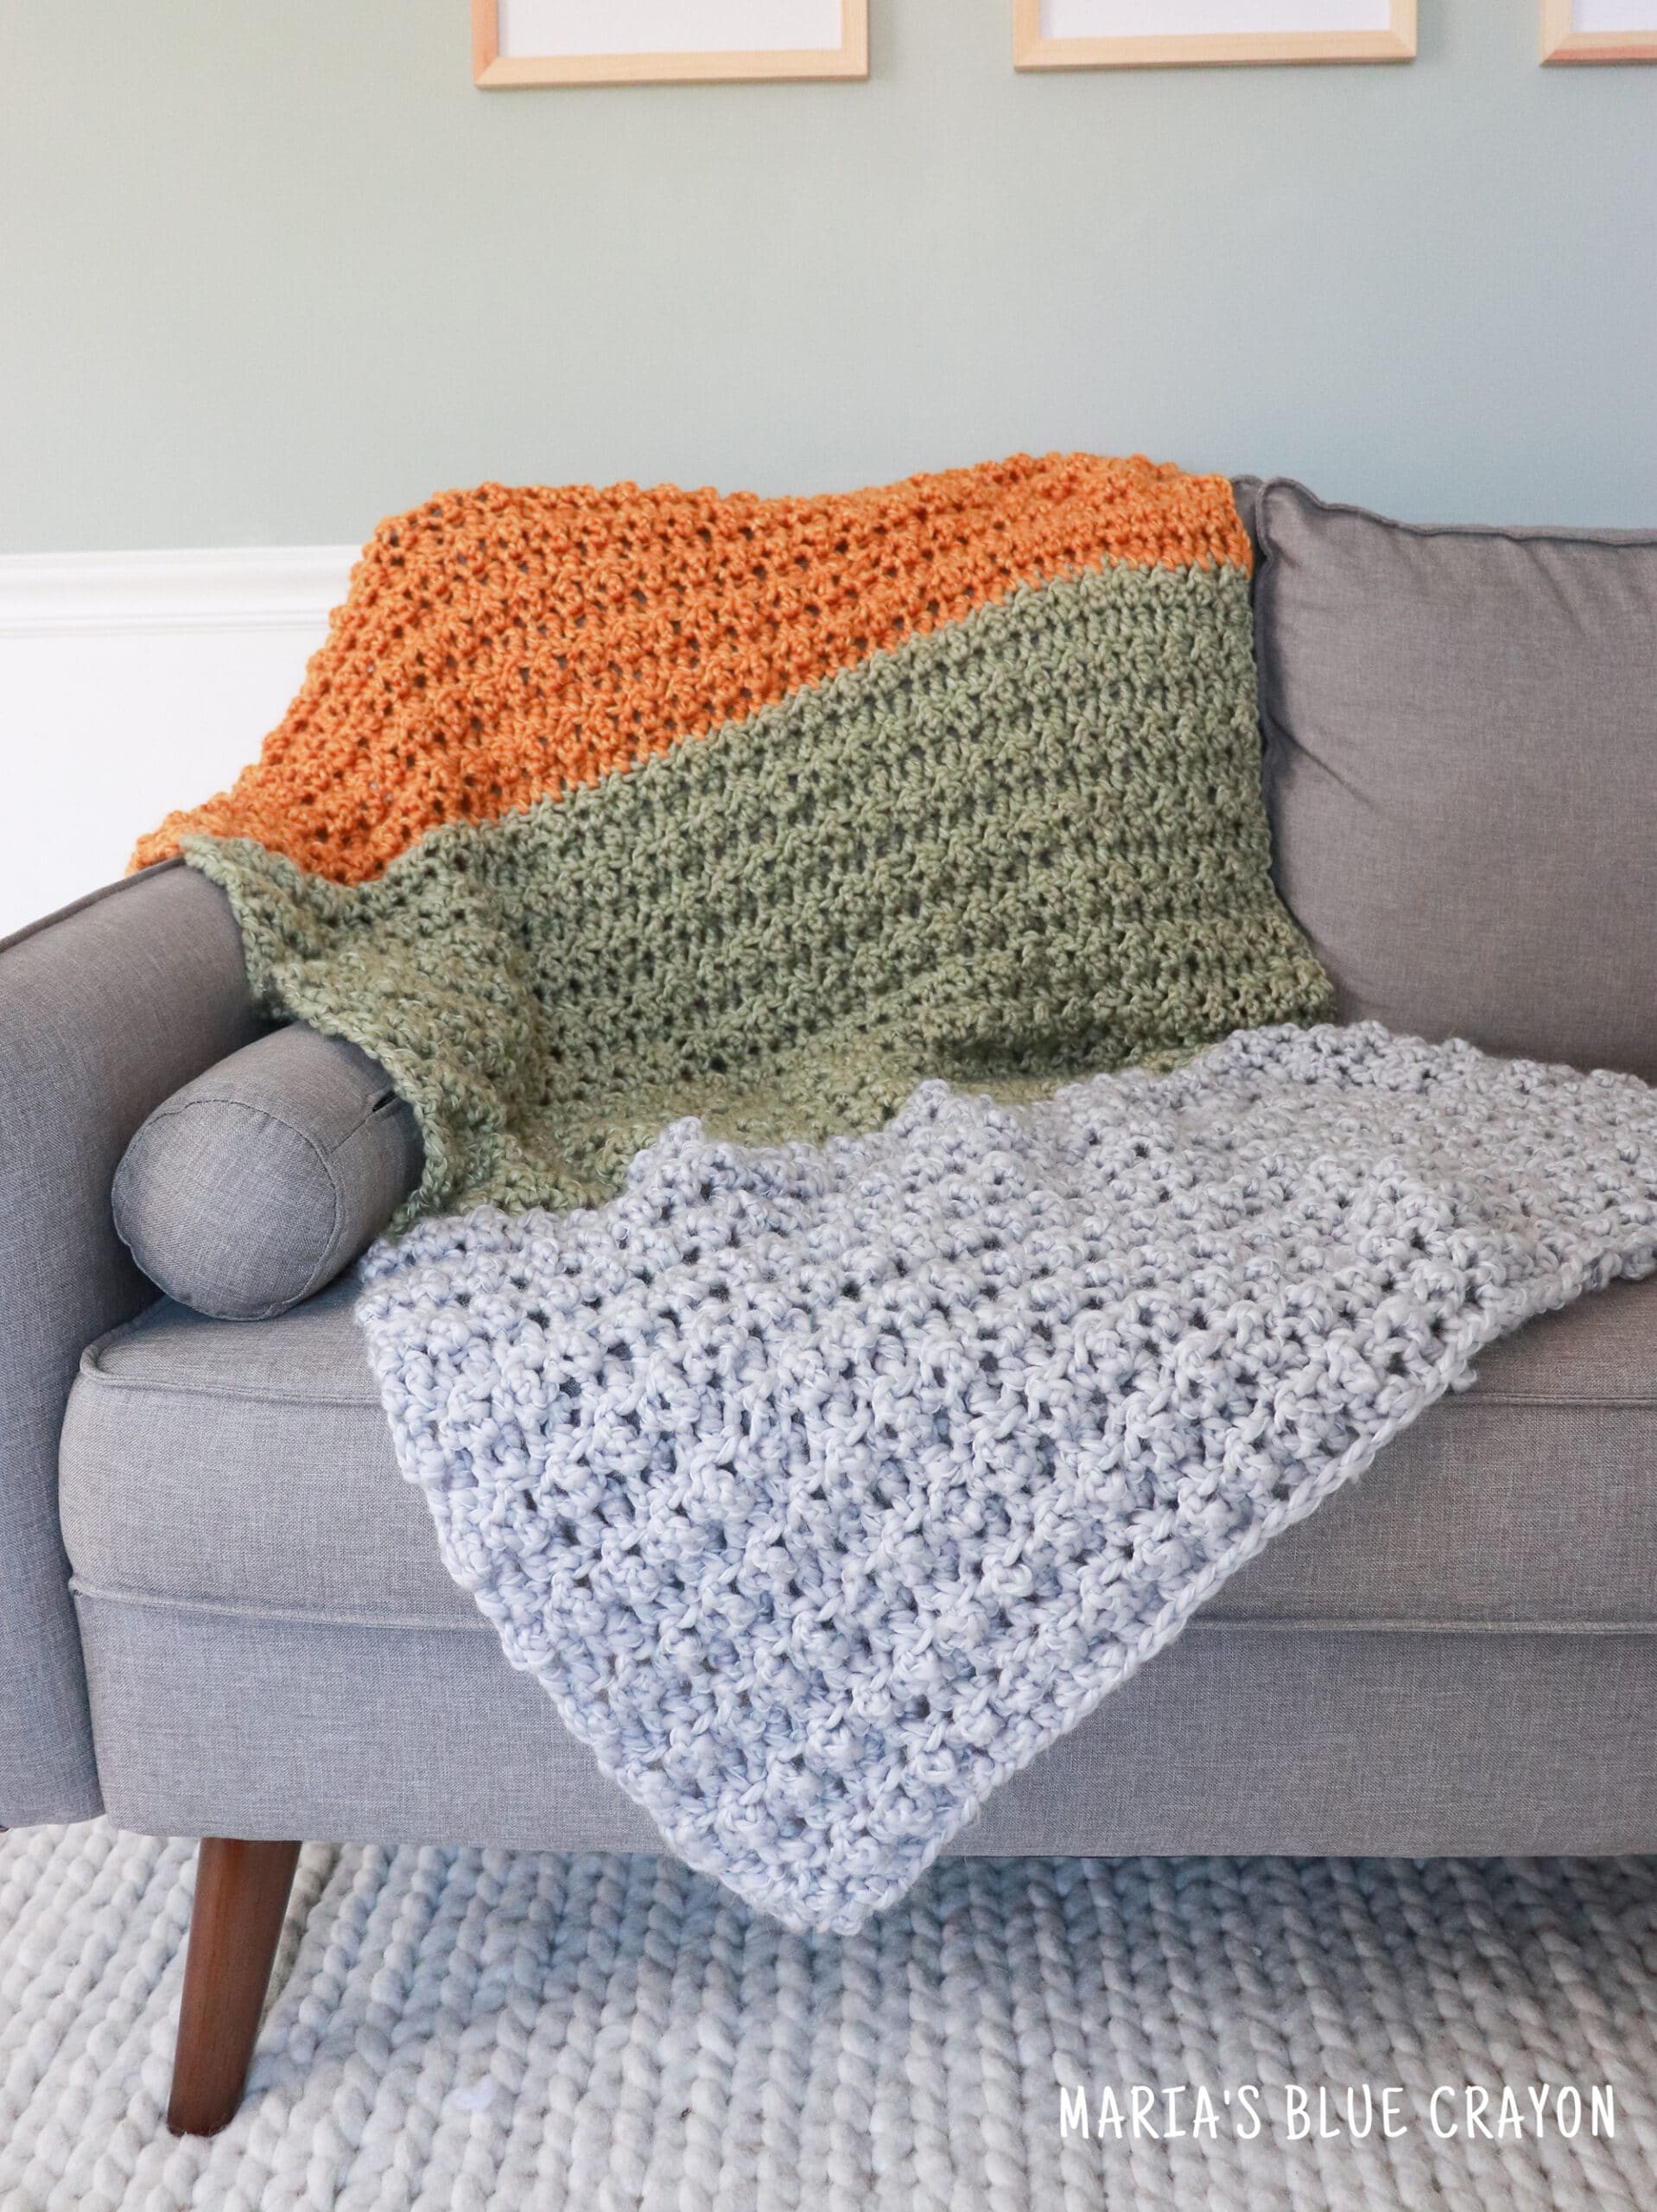 Super Bulky Crochet Blanket pattern by Maria's Blue Crayon